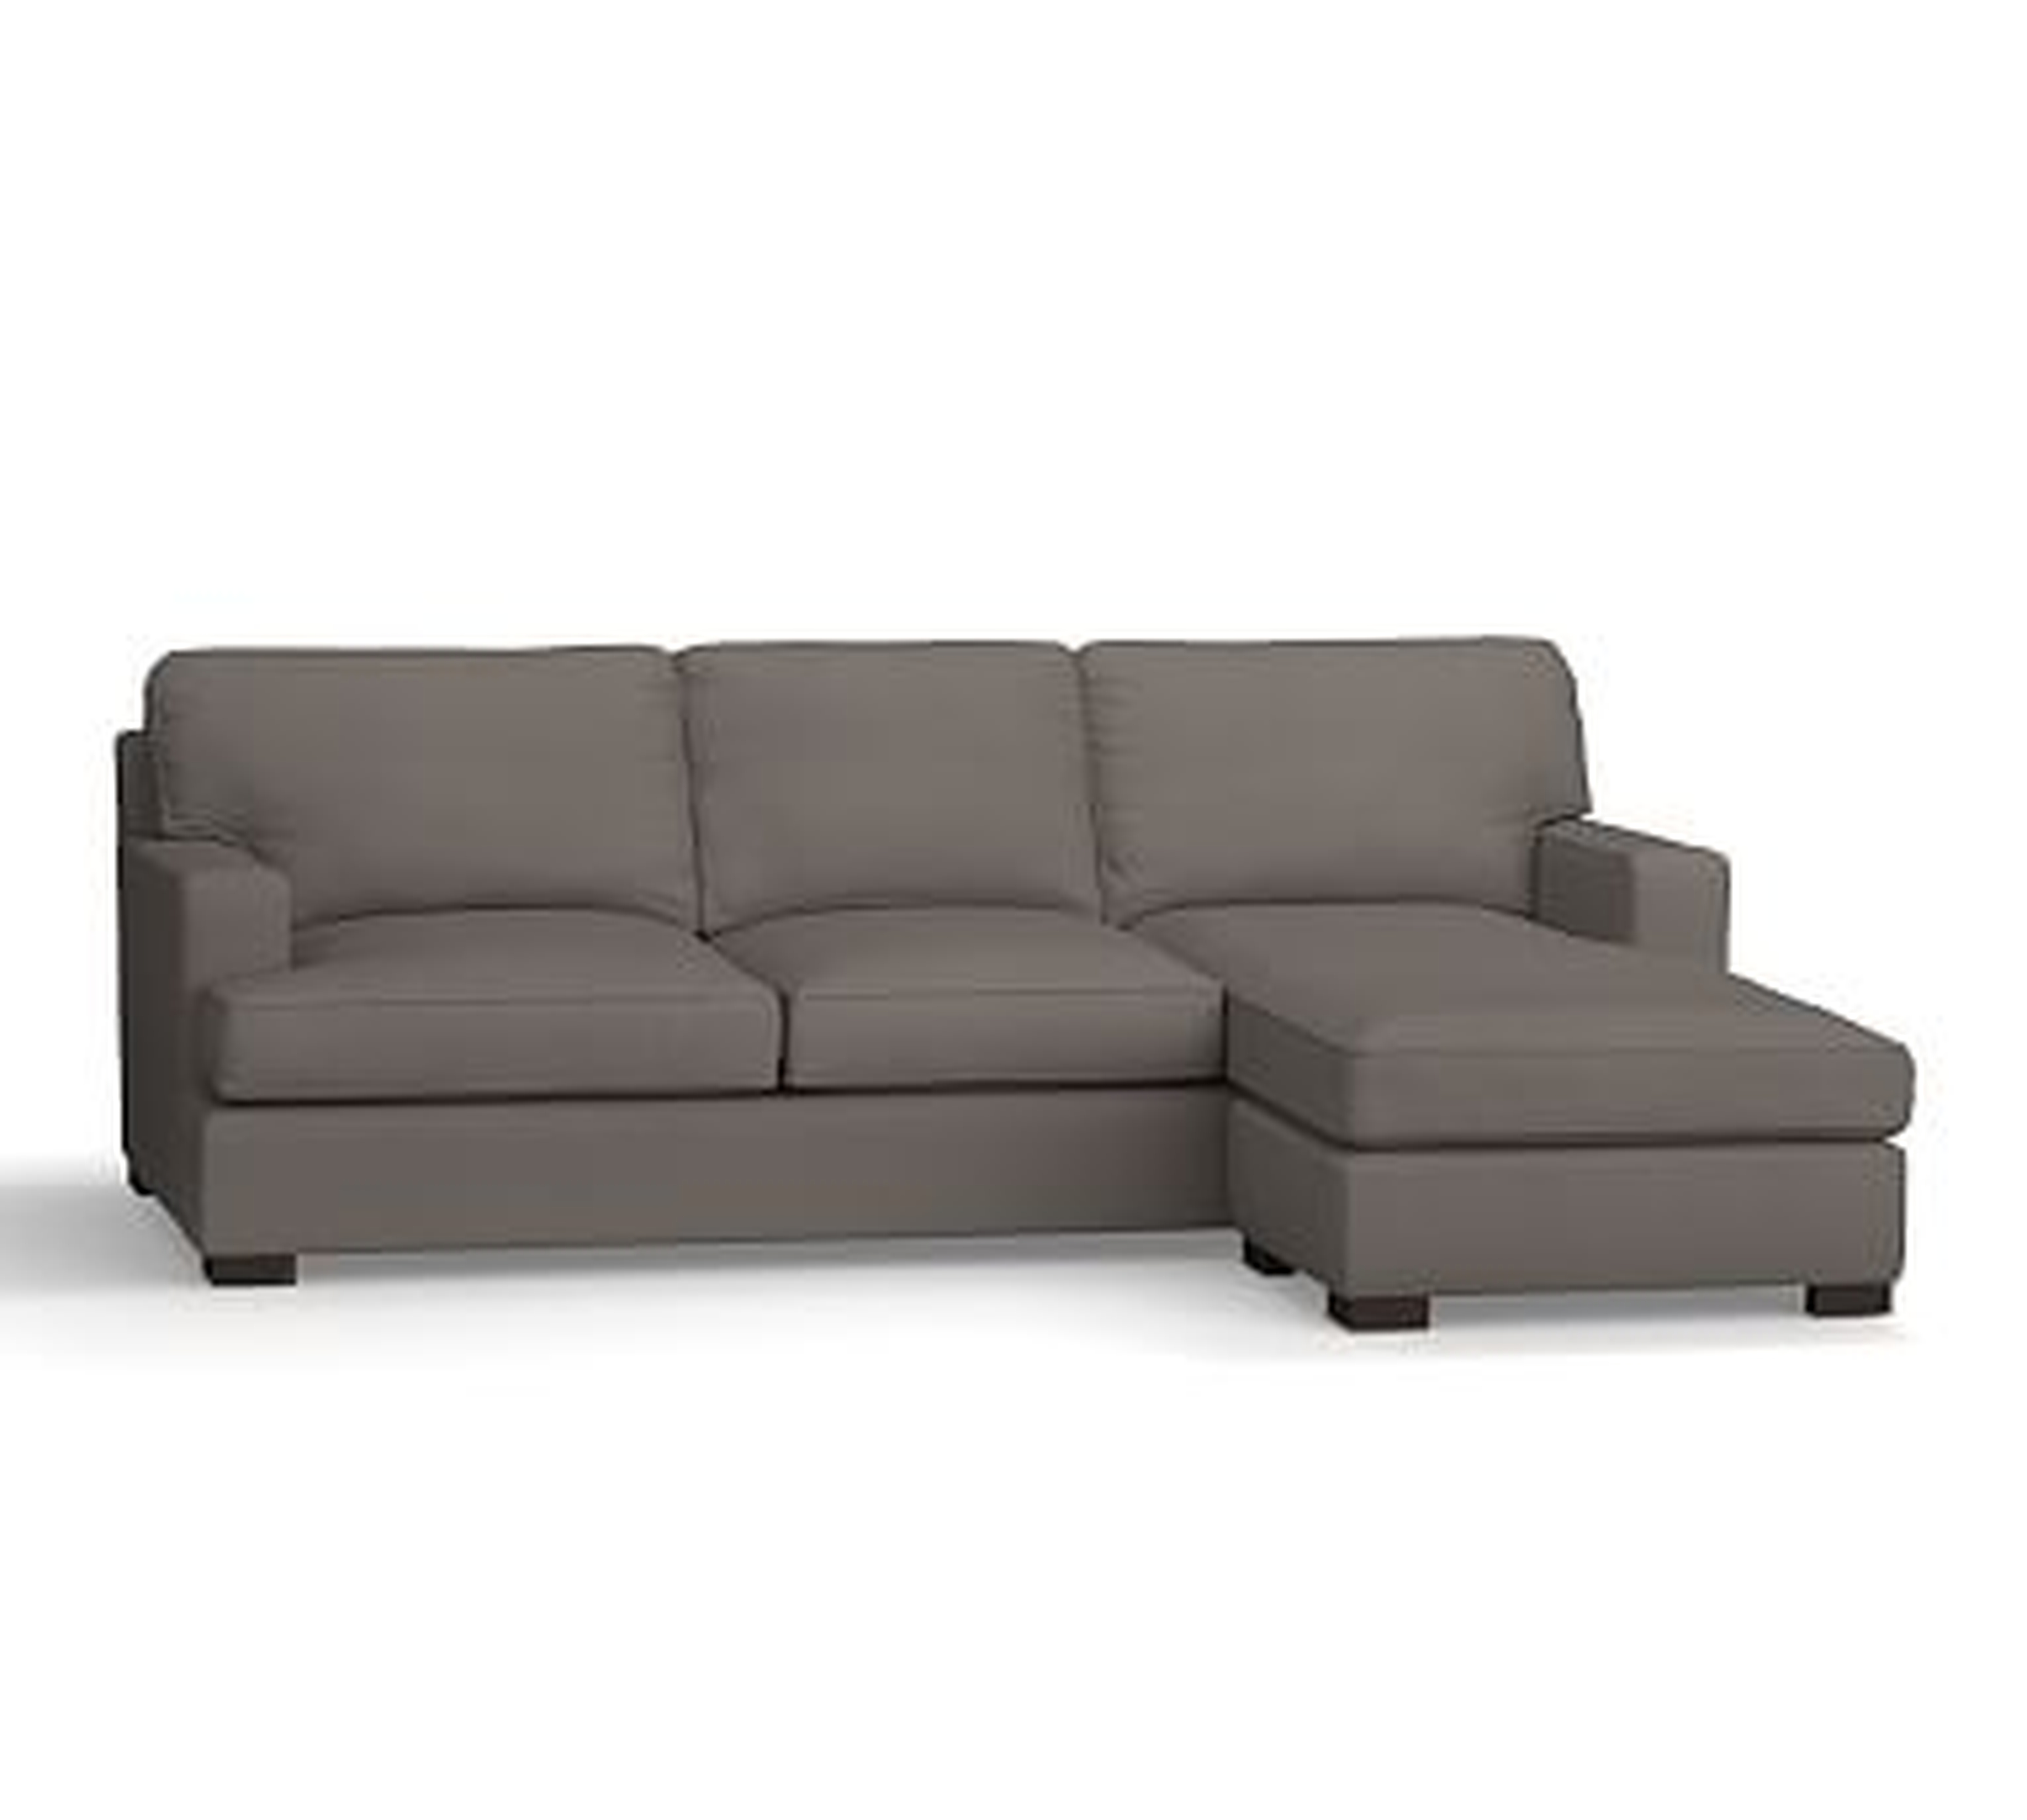 Townsend Square Arm Upholstered Sofa with Reversible Storage Chaise Sectional, Polyester Wrapped Cushions, Twill Metal Gray - Pottery Barn